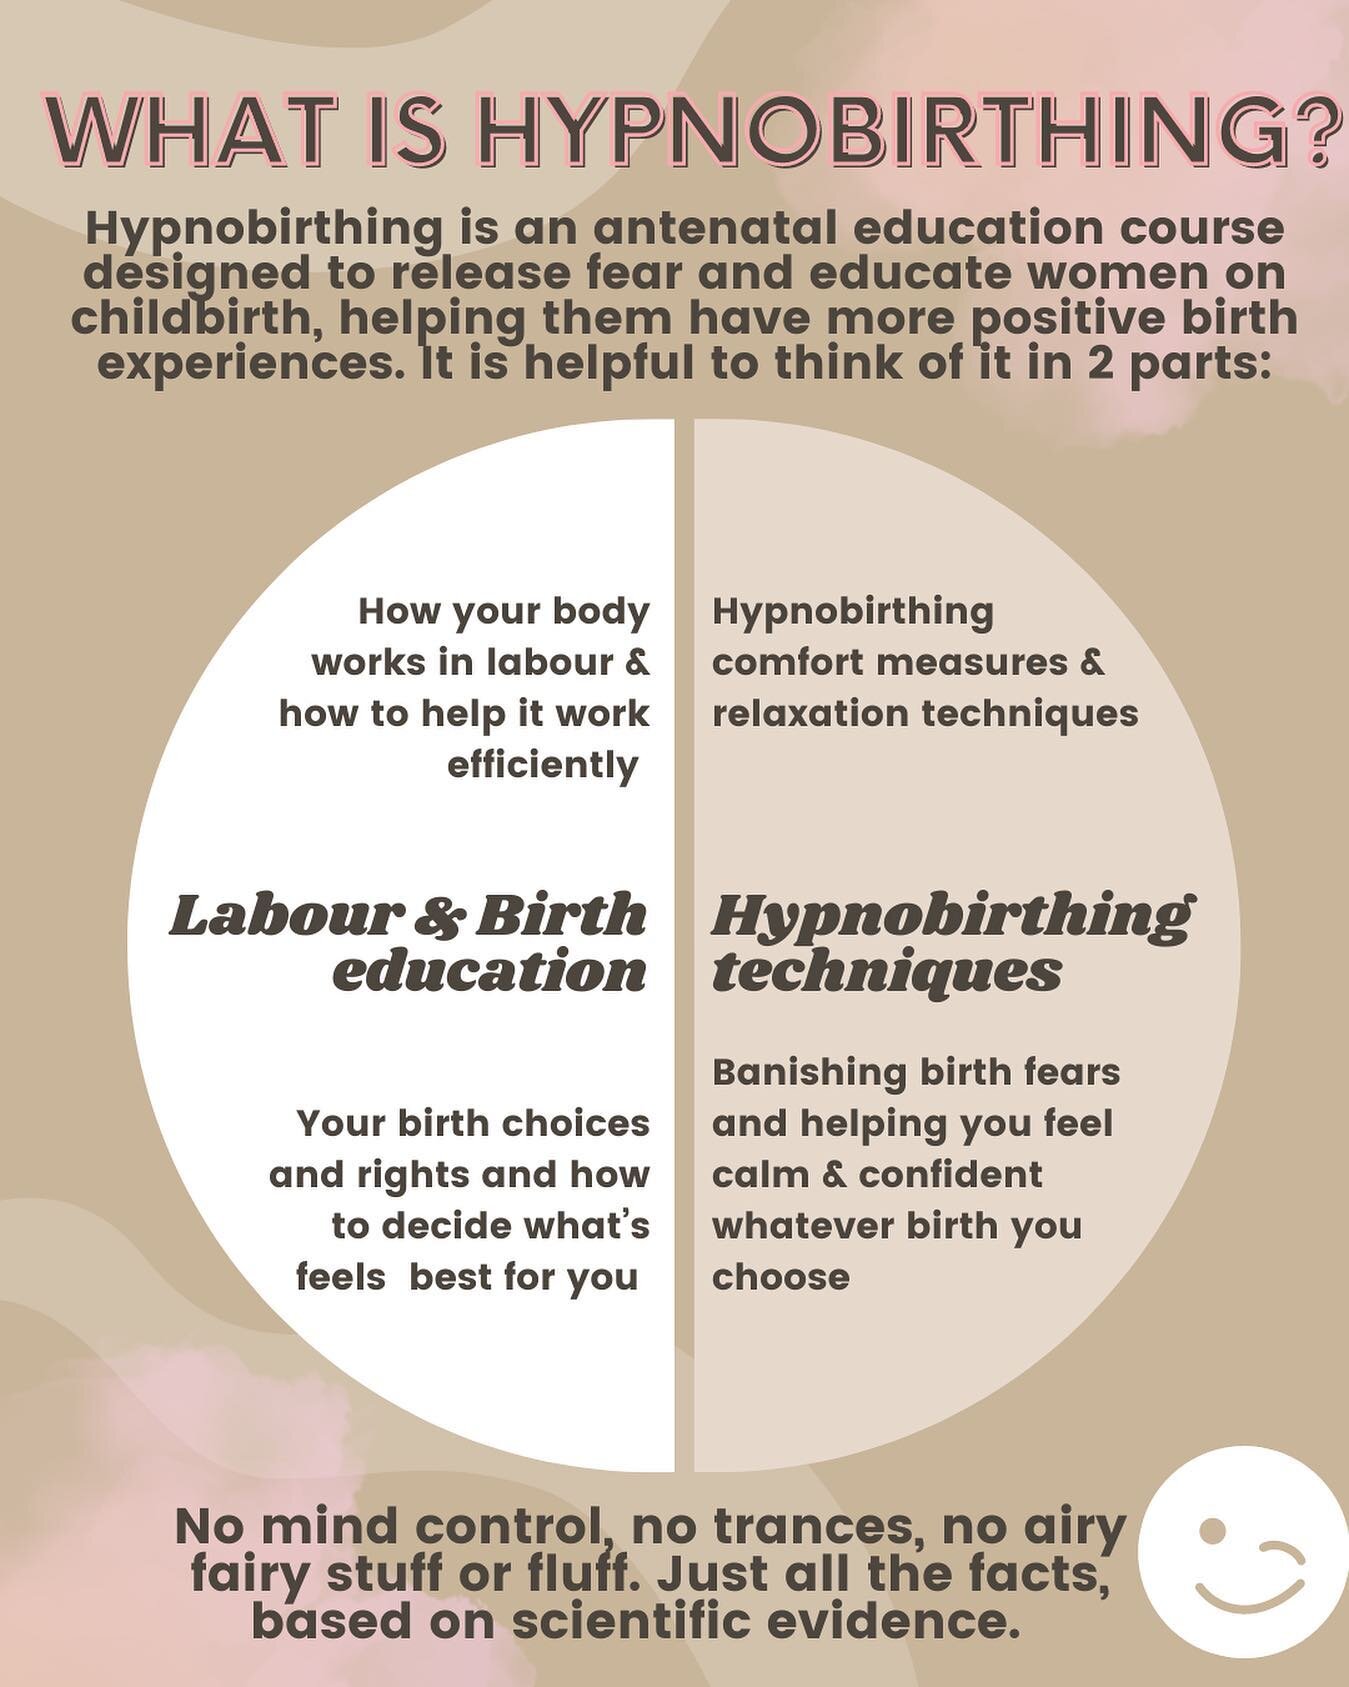 Sometimes, people can feel a little intimidated about Hypnobirthing, probably because of the name! The word &ldquo;Hypno&rdquo; can conjure up visions of being put in a trance, or doing something a bit &lsquo;woo woo&rsquo; or strange! But honestly, 